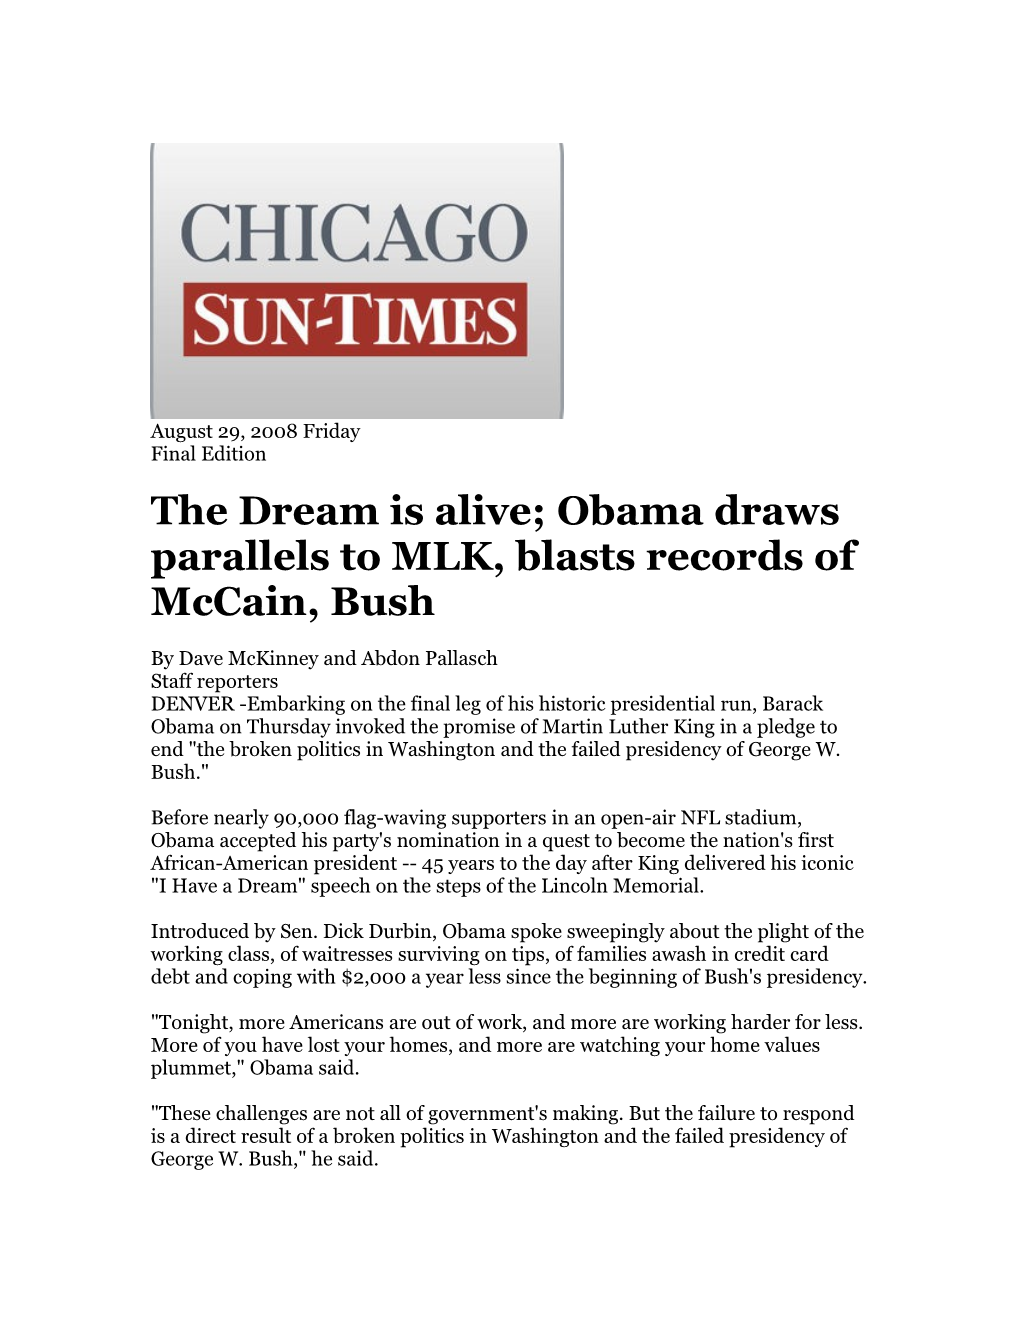 The Dream Is Alive; Obama Draws Parallels to MLK, Blasts Records of Mccain, Bush